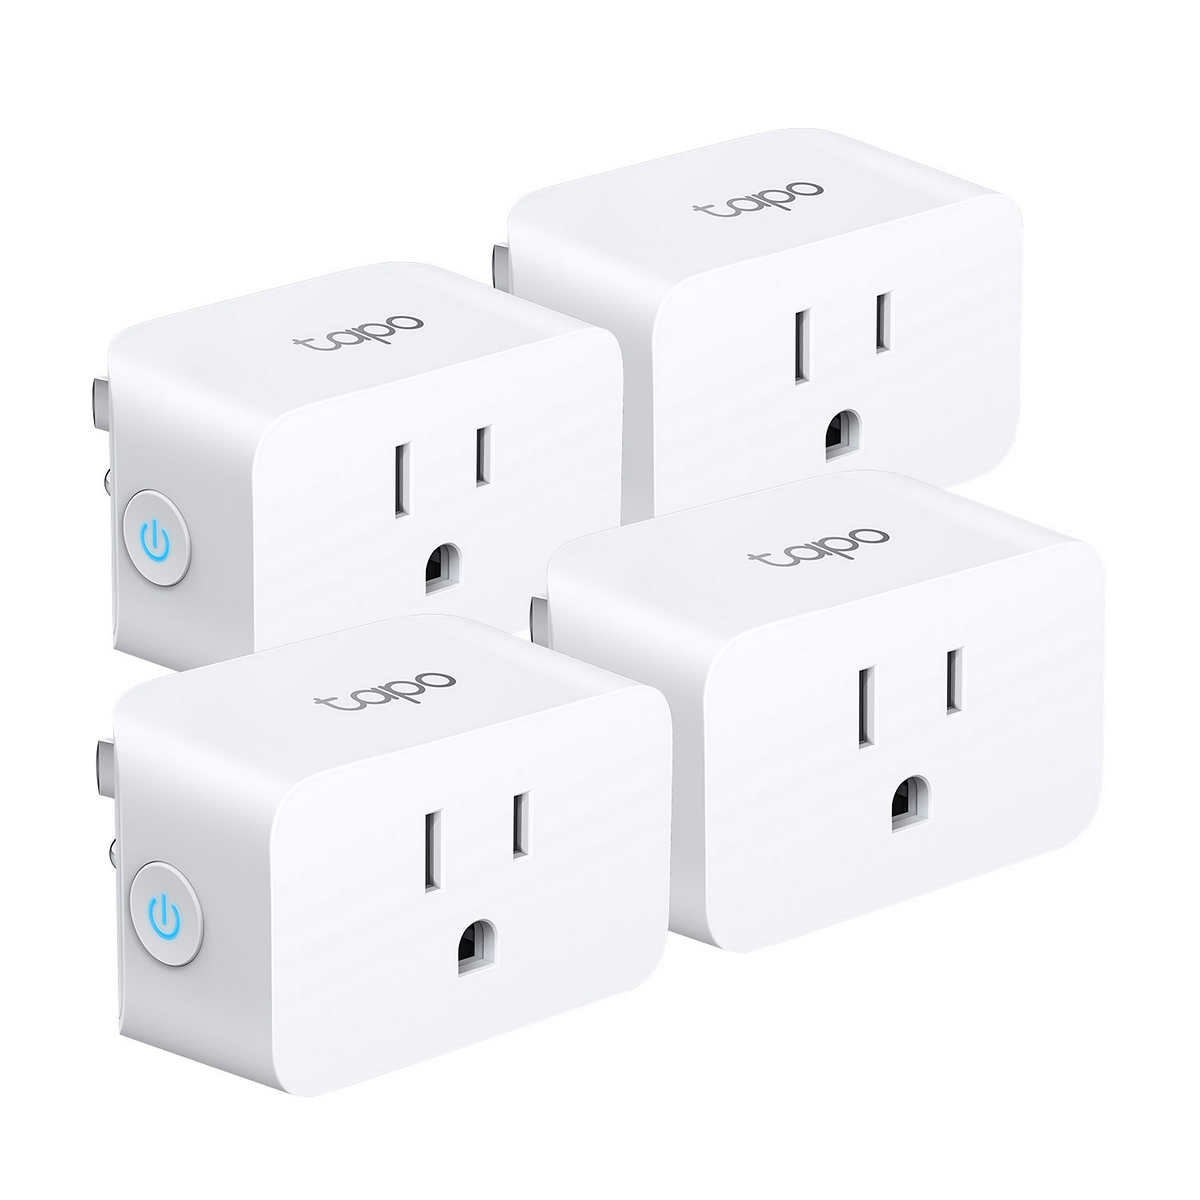 Feit Electric Smart Plug, WiFi Plug Works with Alexa and Google Home,  Indoor Plug, No Hub Required, 2.4Ghz Network, Remote Control from Anywhere,  15